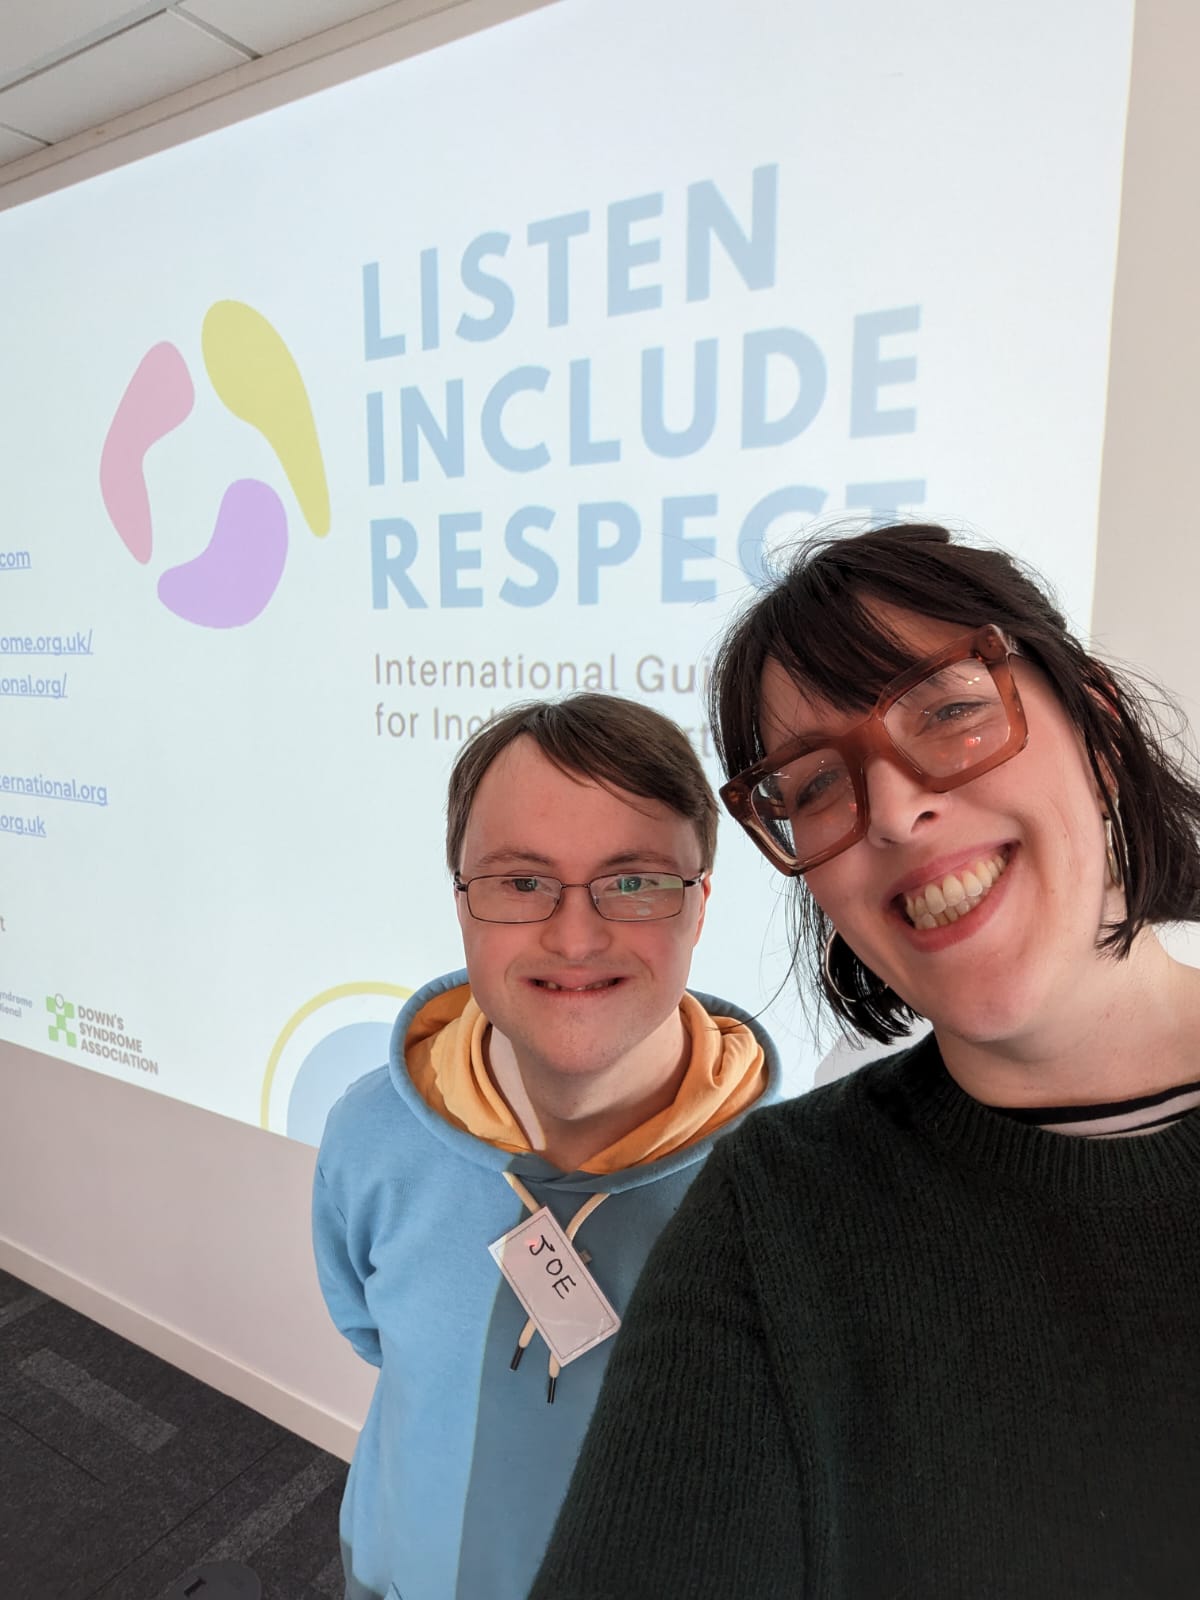 Two people smiling in front of a Listen, Include, Respect backdrop